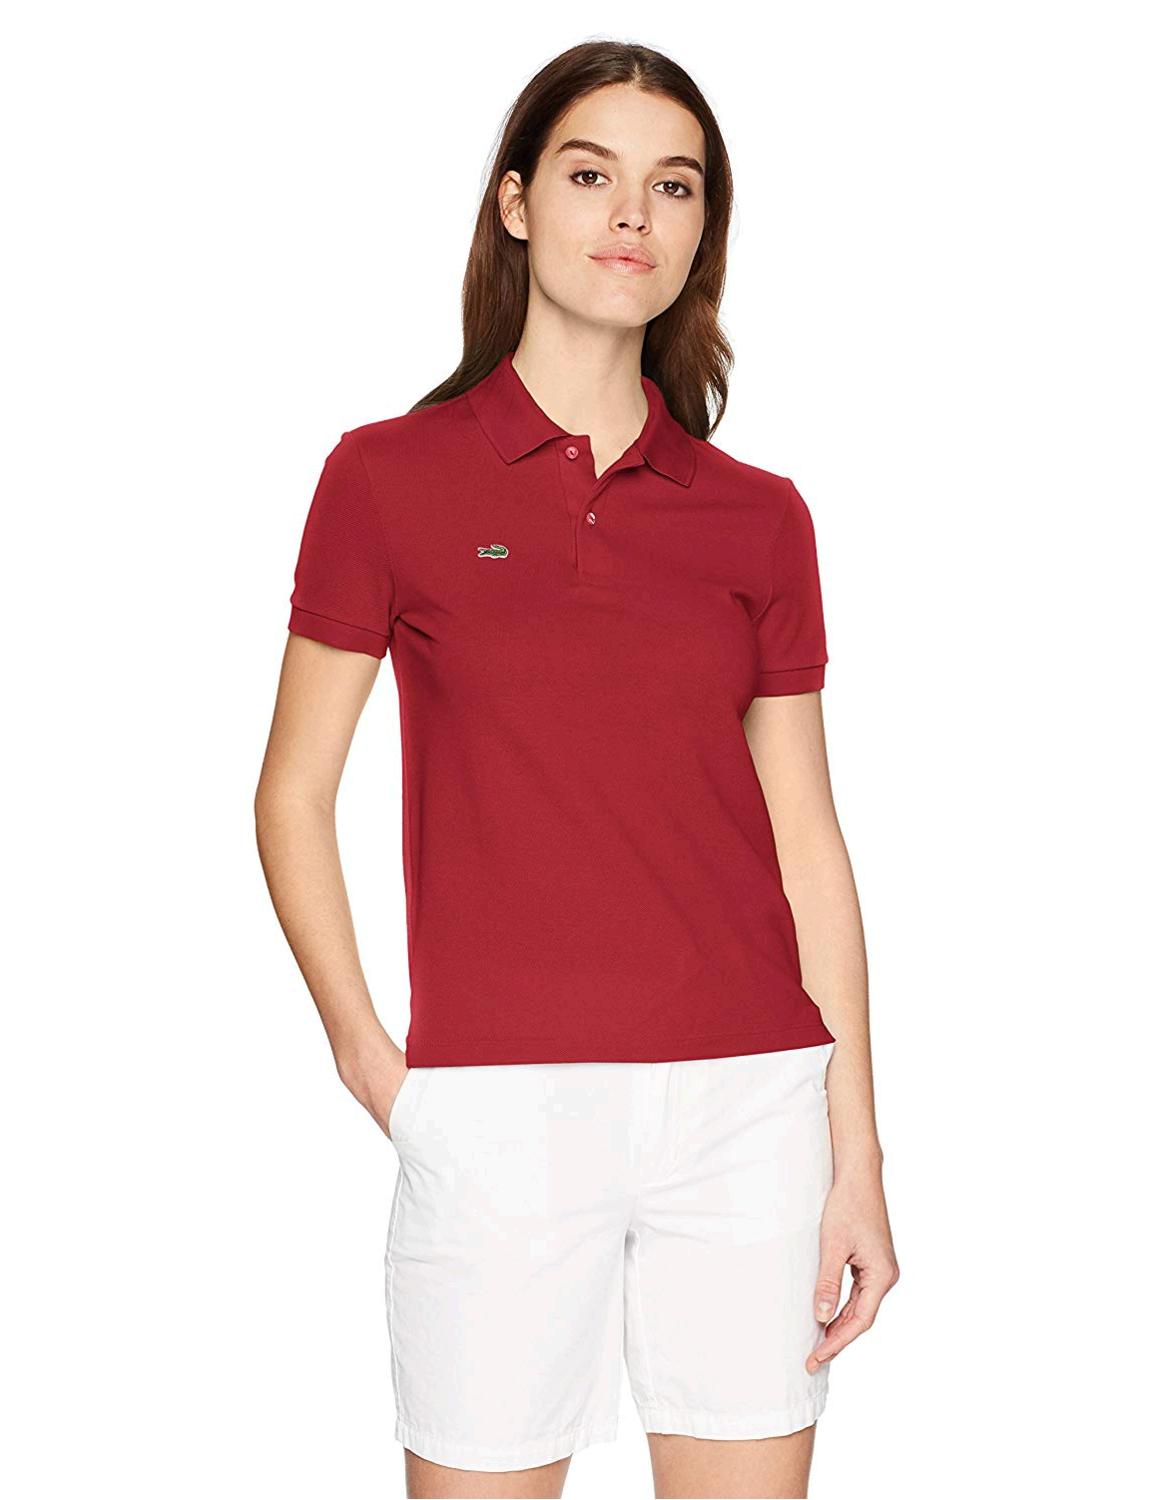 lacoste polo shirts turkey,Save up to 16%,www.ilcascinone.com